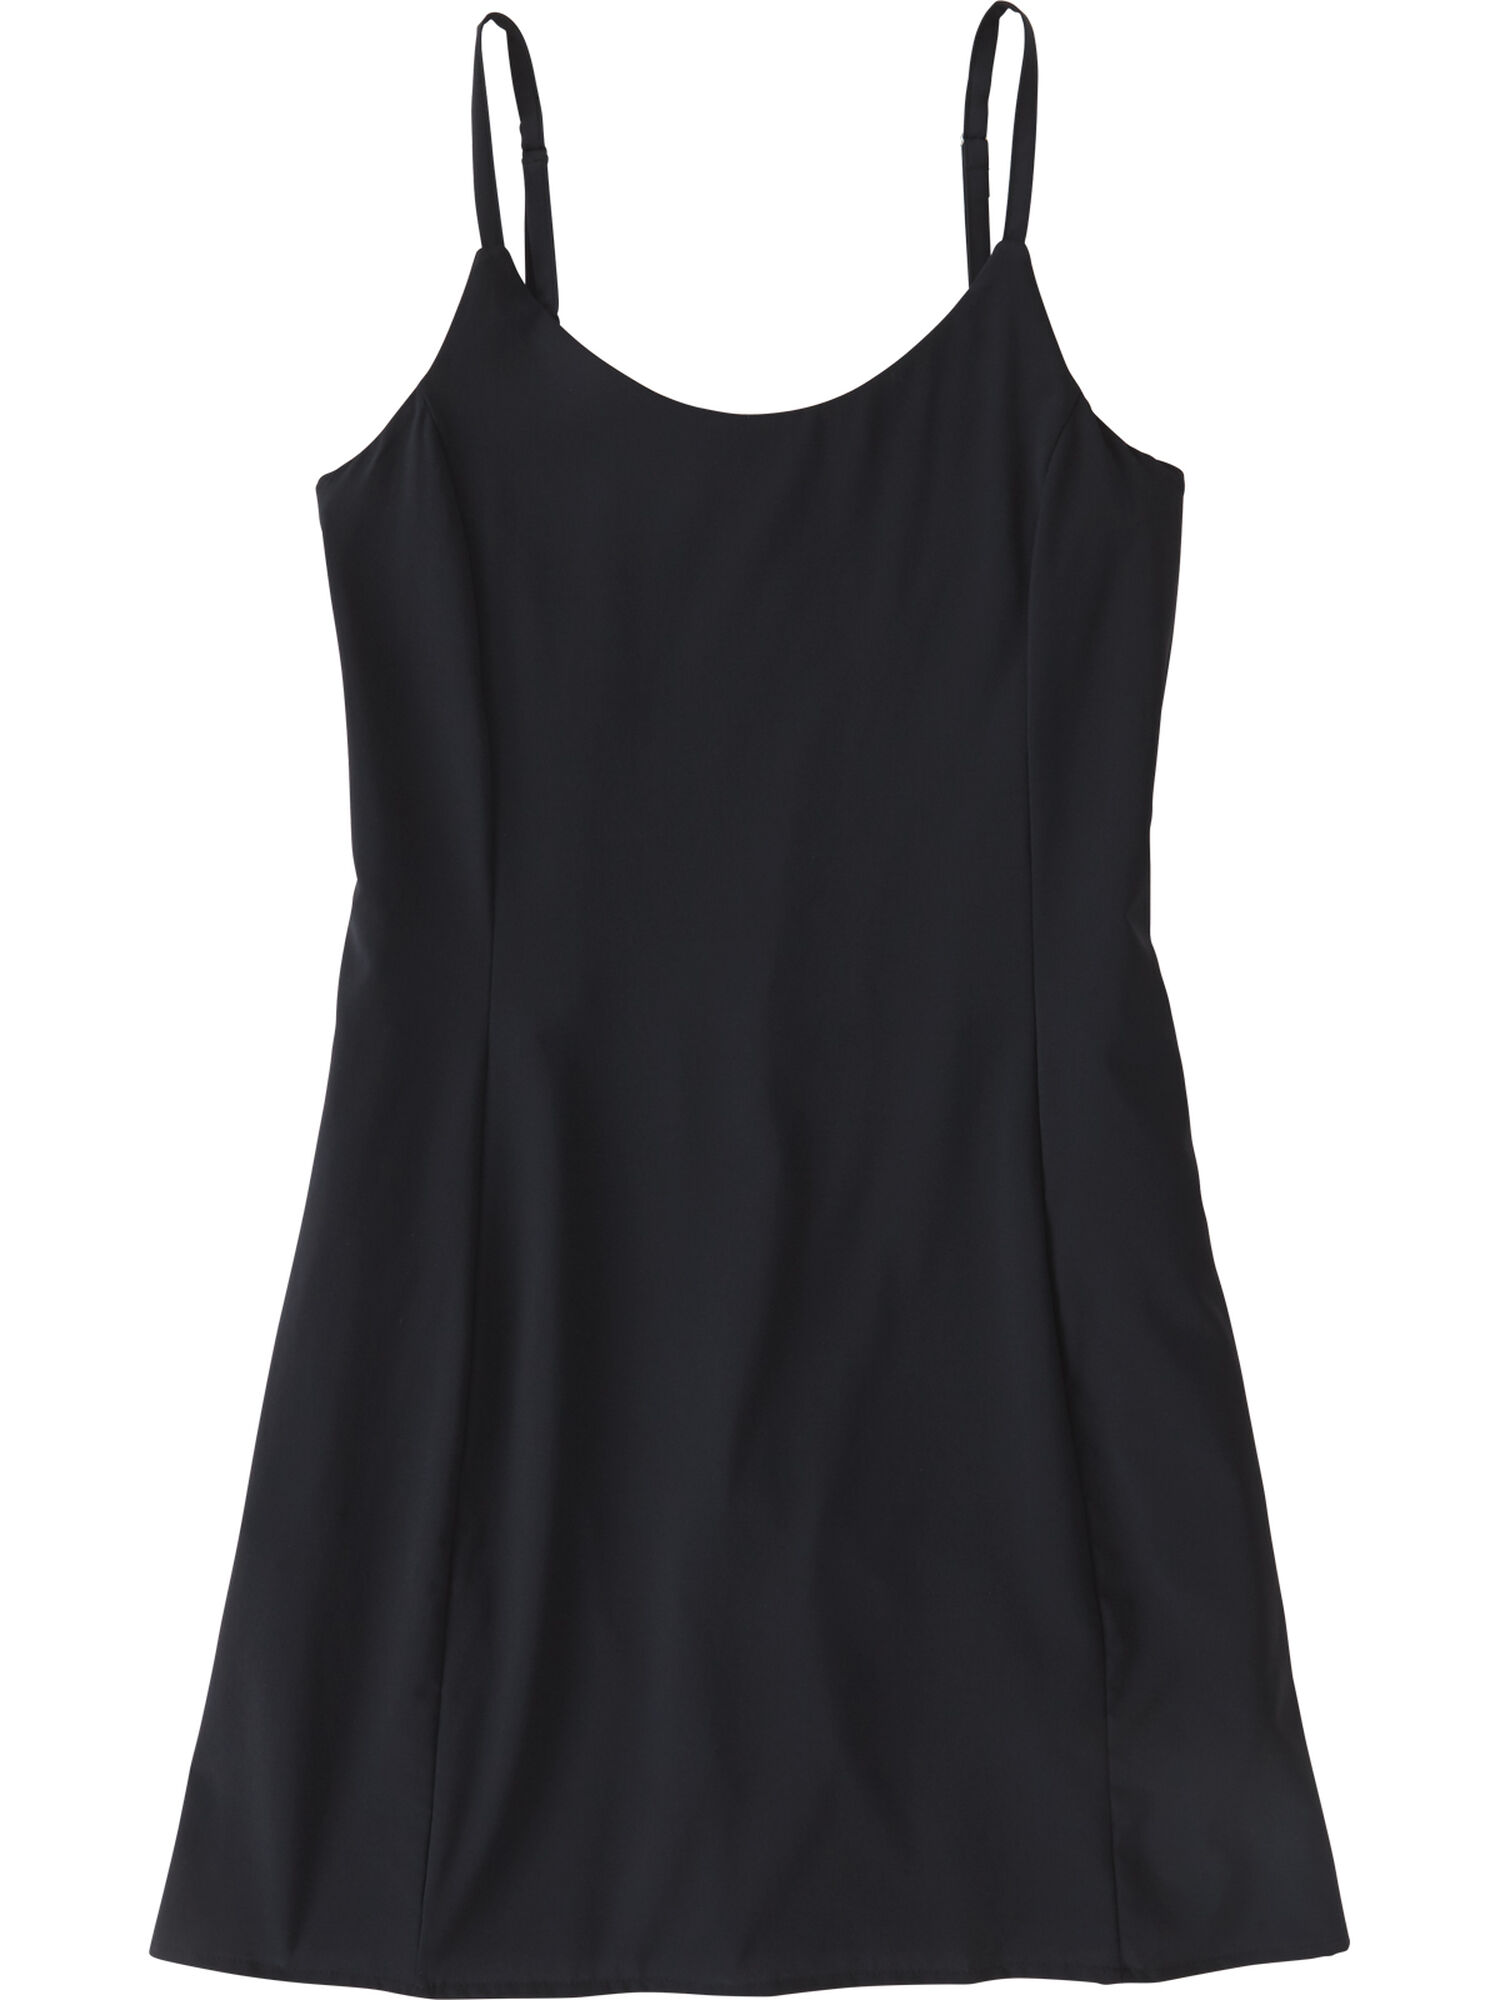 Toad and Co Sport Dress: Crusher Adventure | Title Nine